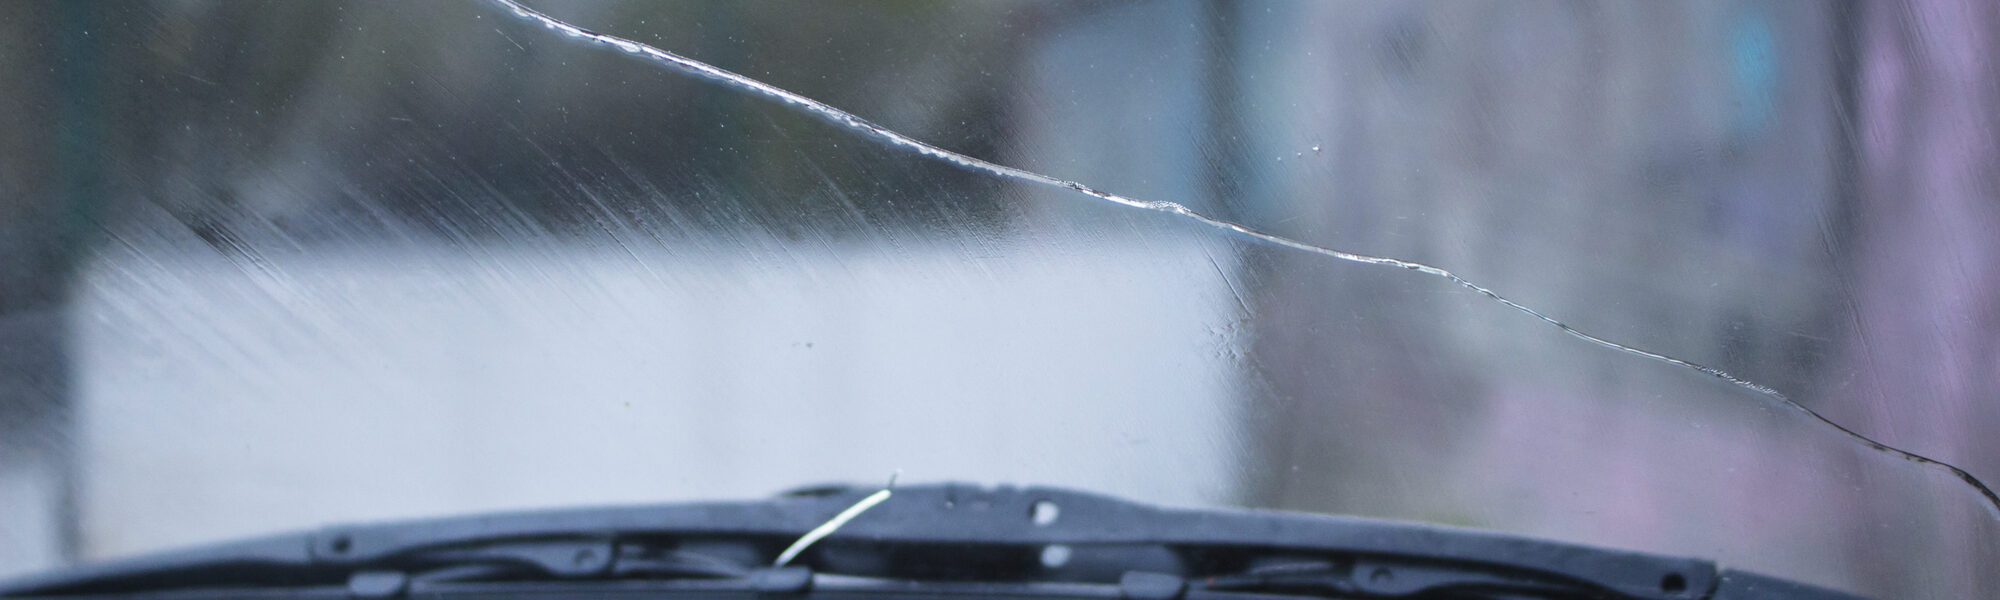 Long extended crack on a Camry windshield, view from inside, rainy weather